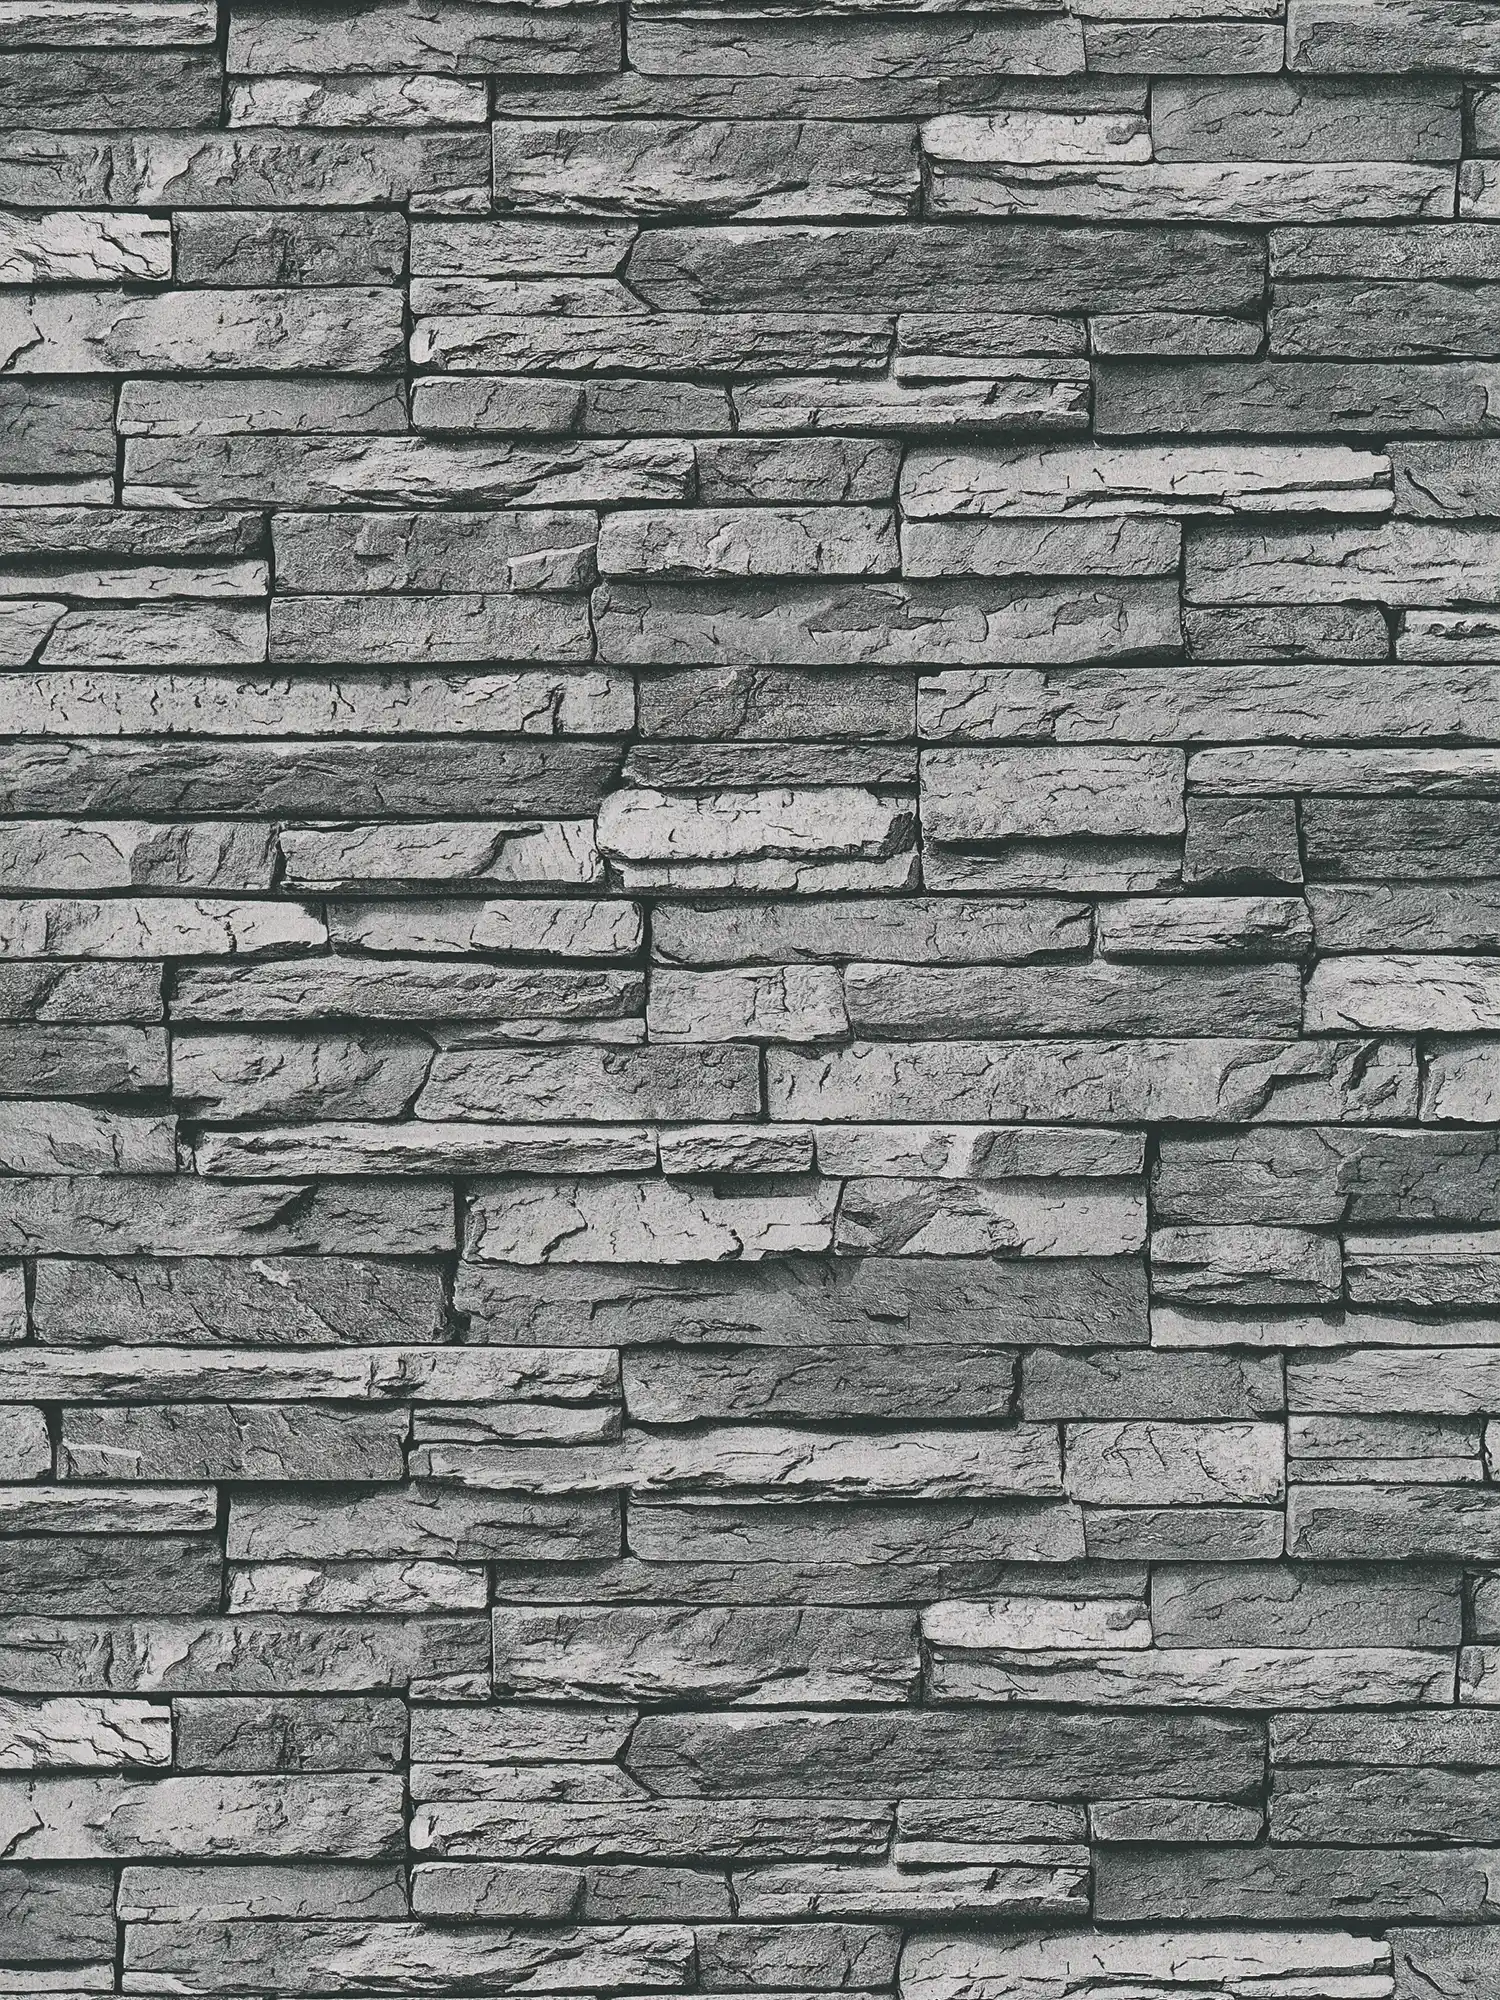 Self-adhesive wallpaper | natural stone look with 3D effect - grey, black
